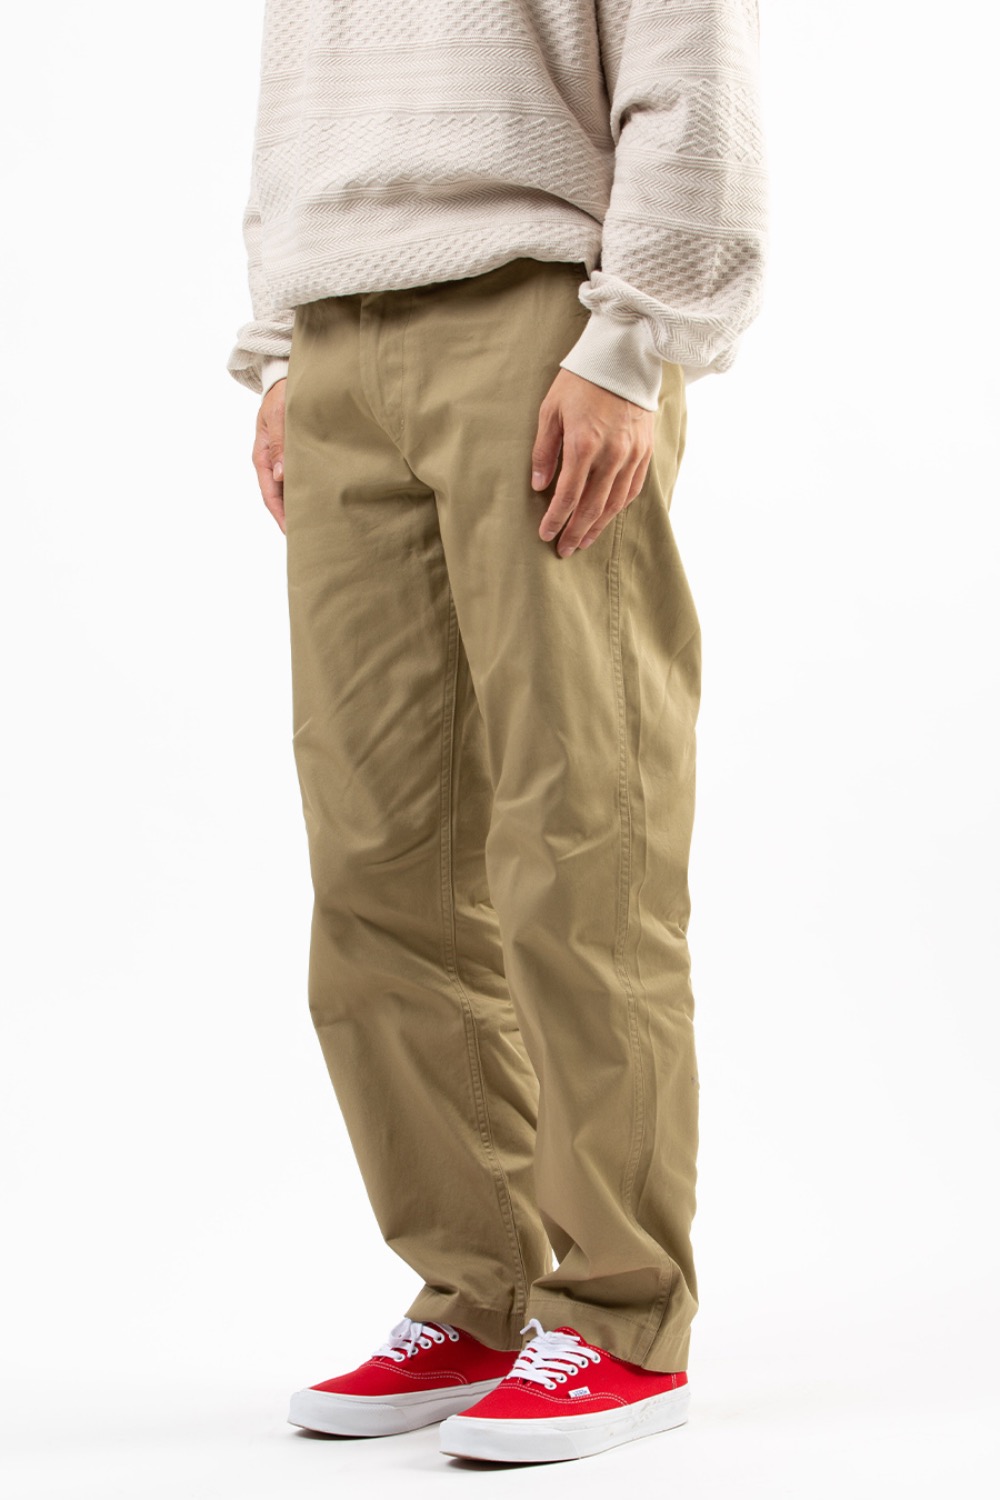 [RESTOCK] VINTAGE COTTON RELAXED CHINO PANTS BEIGE